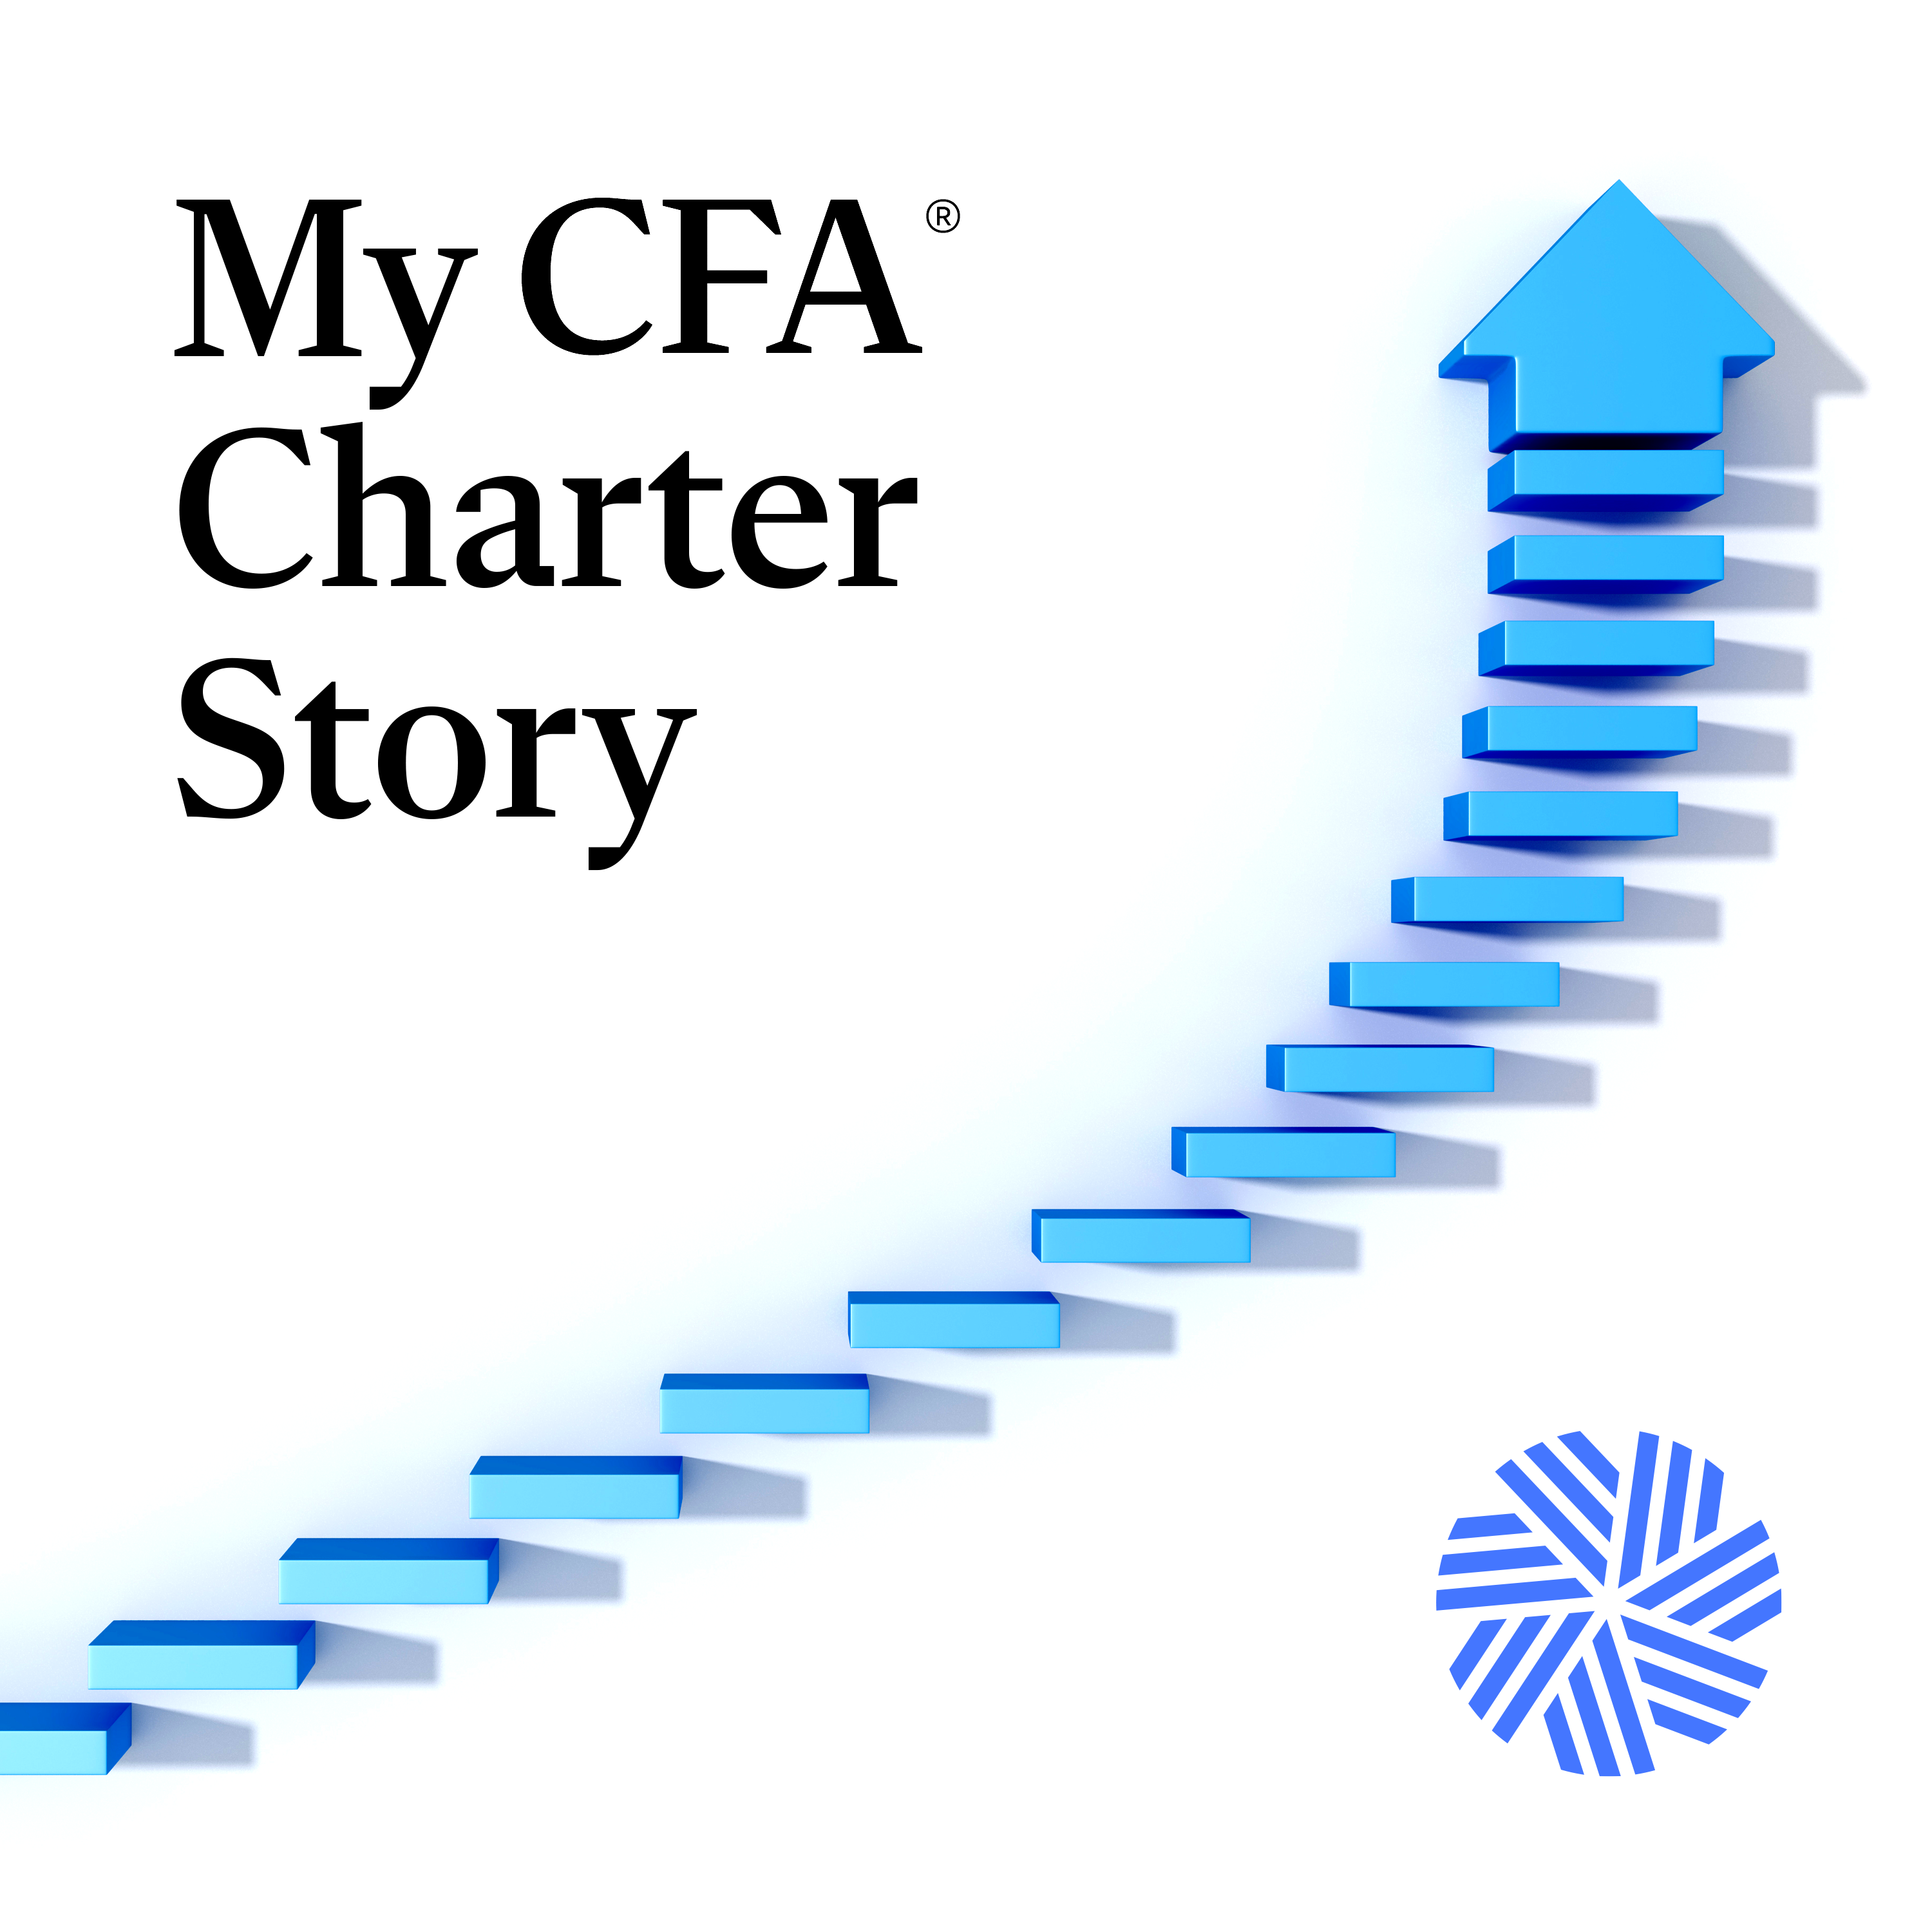 My Charter Story